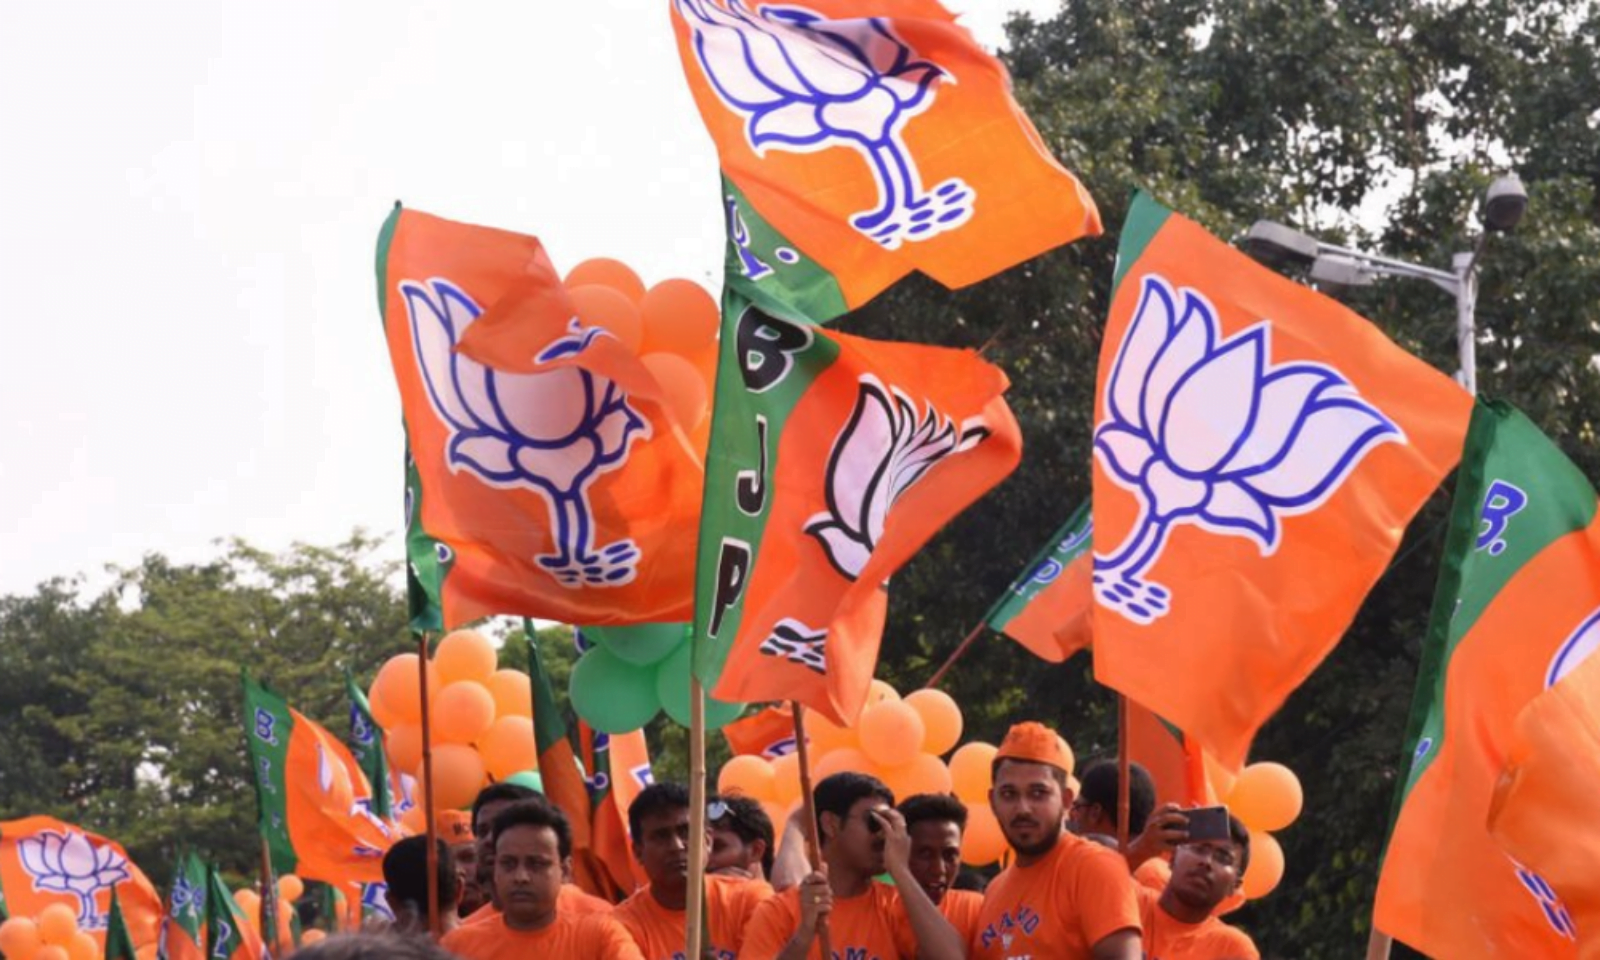 BJP Party : Big Political issues inside